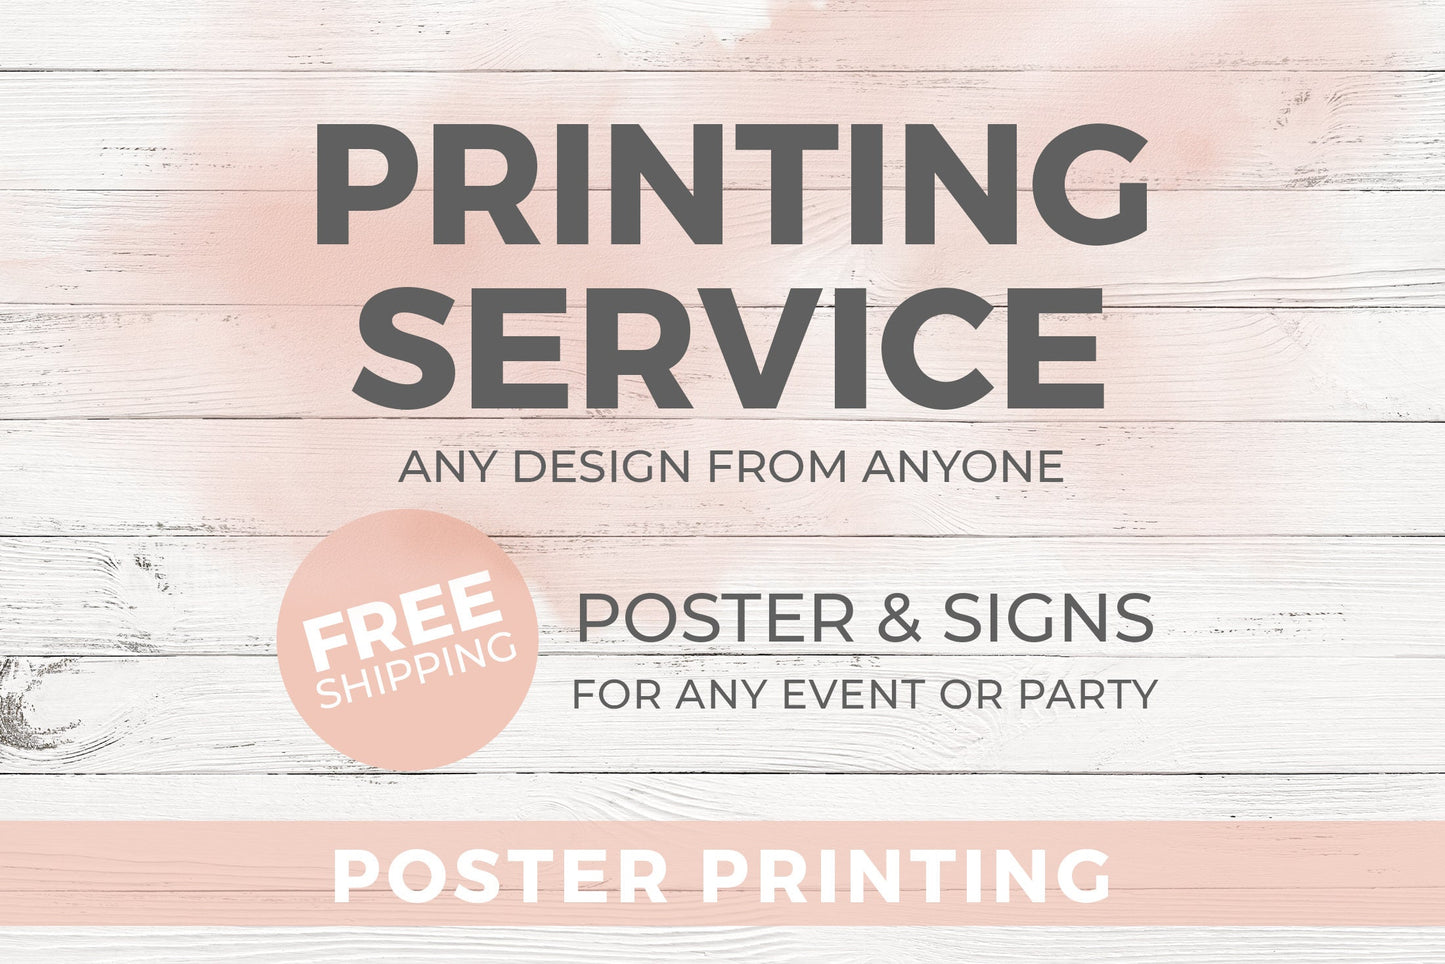 Poster and Signs - Print Your Design - Party and Event Posters - Day of Party Signage